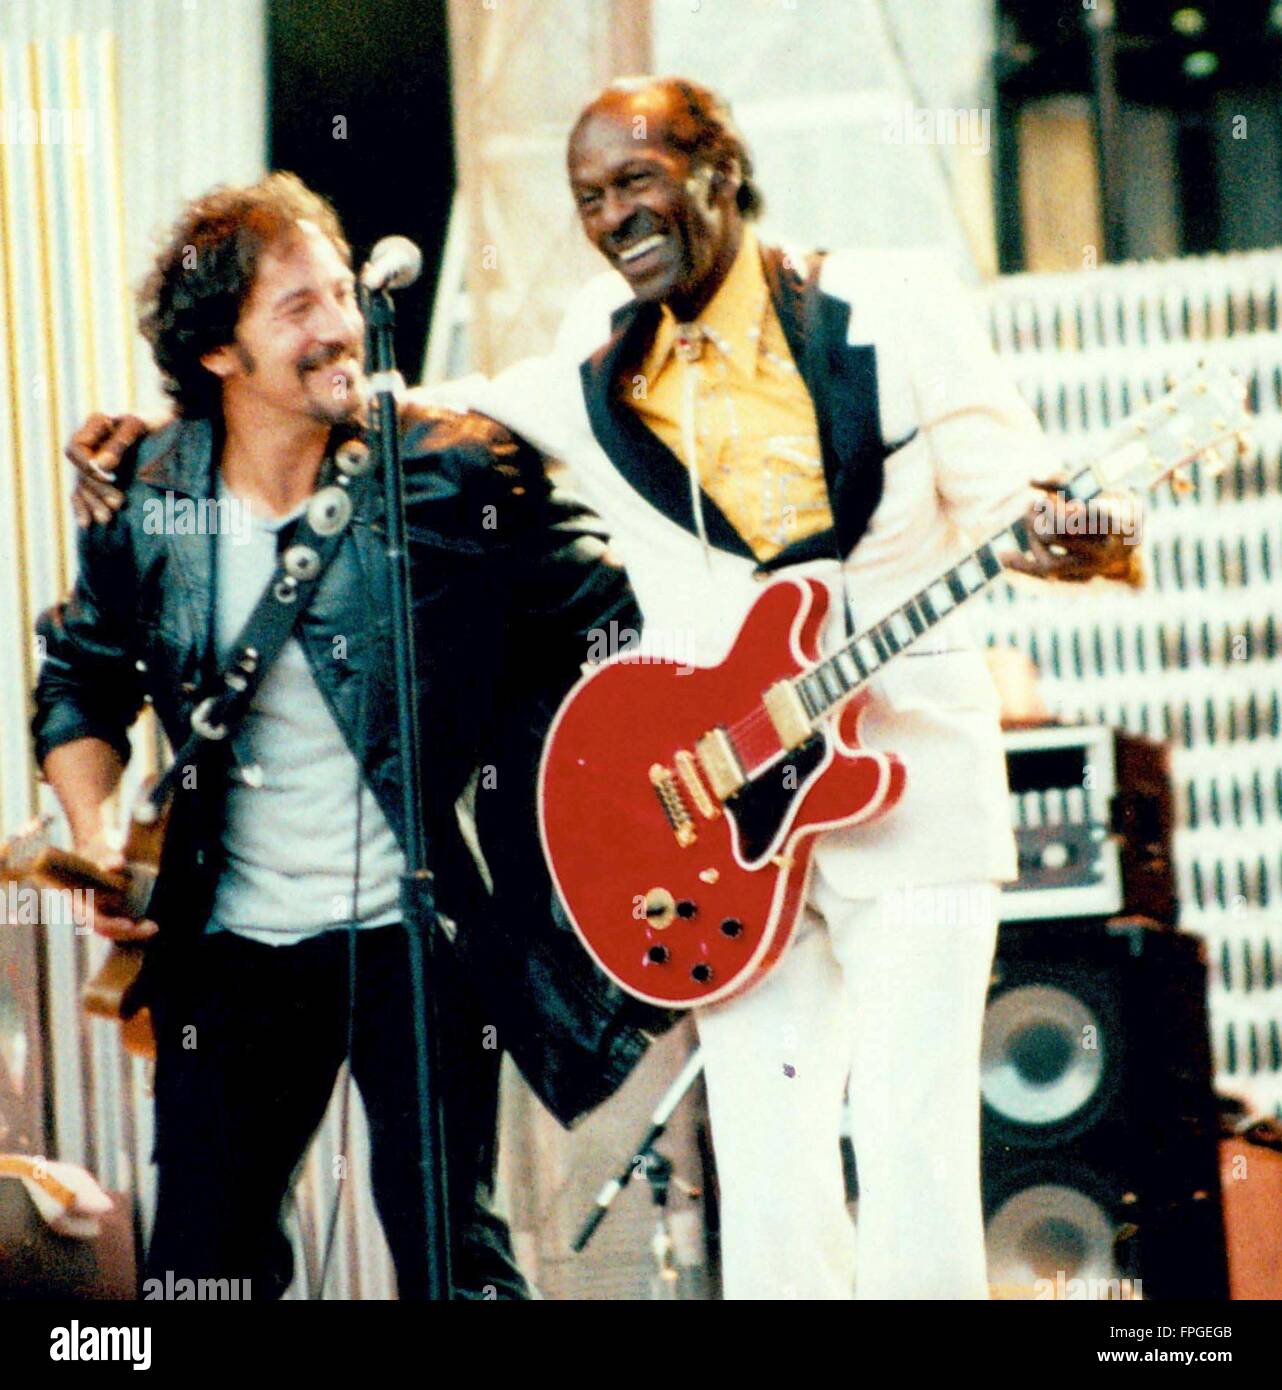 BRUCE SPRINGSTEEN, CHUCK BERRY                                                               CONCERT FOR HALL OF FAME, CLEVELAND  09-02-1995  photo Michael Brito Stock Photo